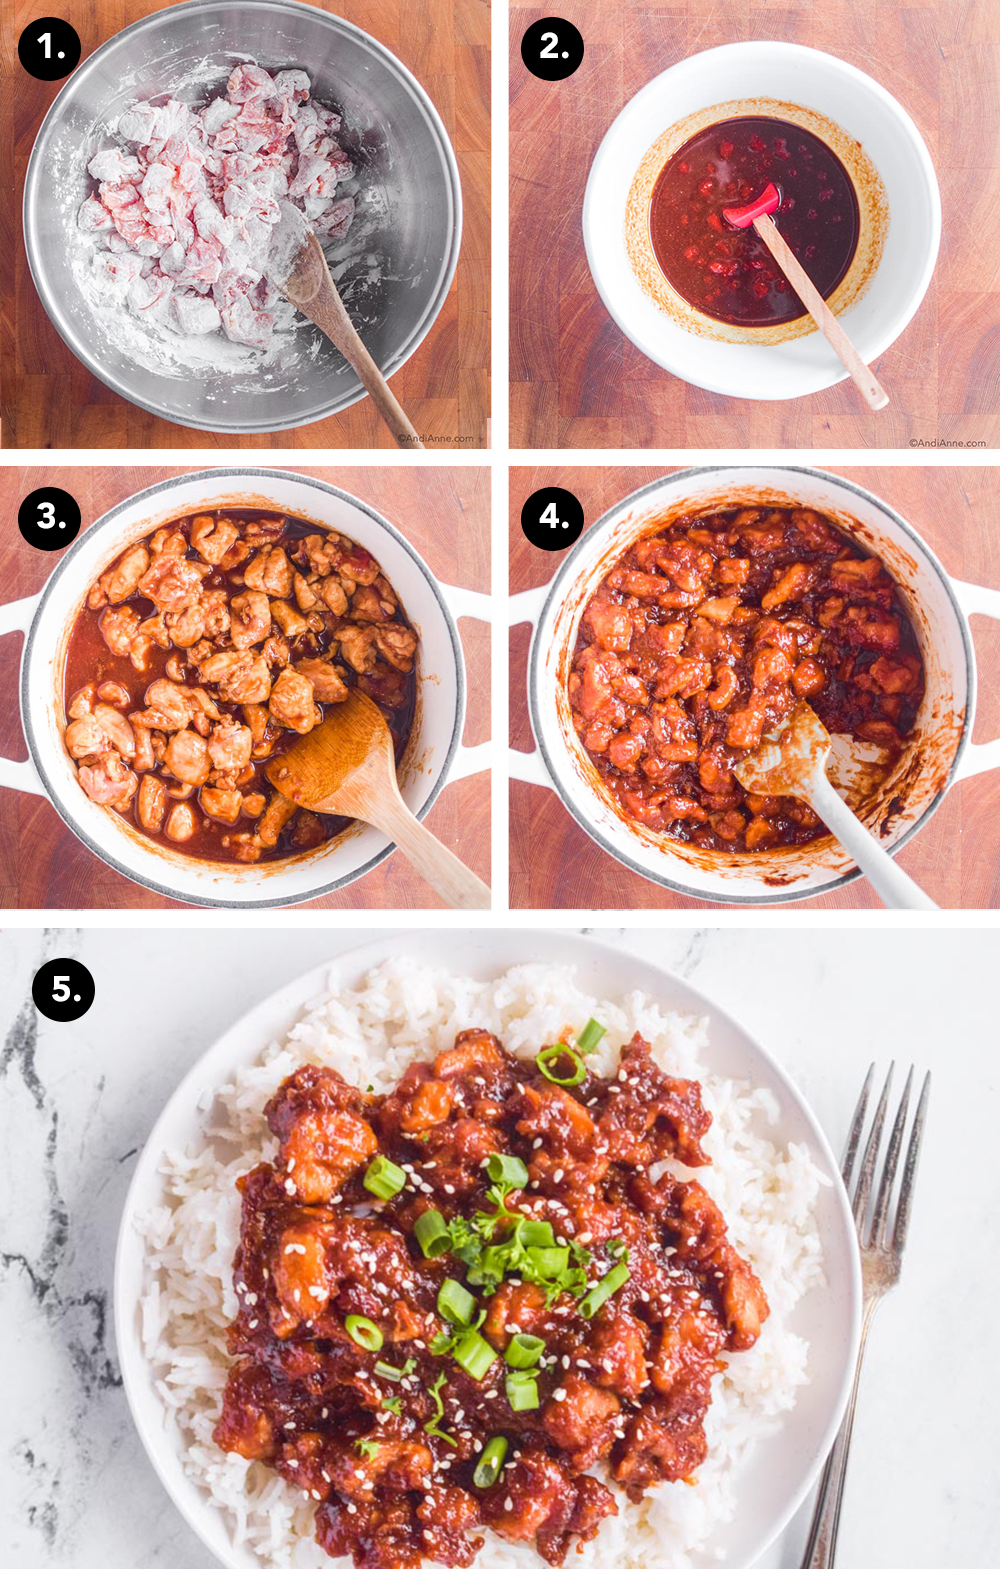 five separate images showing steps to make the recipe: first, chopped chicken in cornstarch in a bowl. Second, a bowl of sauce. Third, chicken in white pot with sauce mixed in. Fourth, cooked chicken in sweet and sour sauce in white pot. Fifth, white plate with rice and sweet and sour chicken on top with fork beside it.